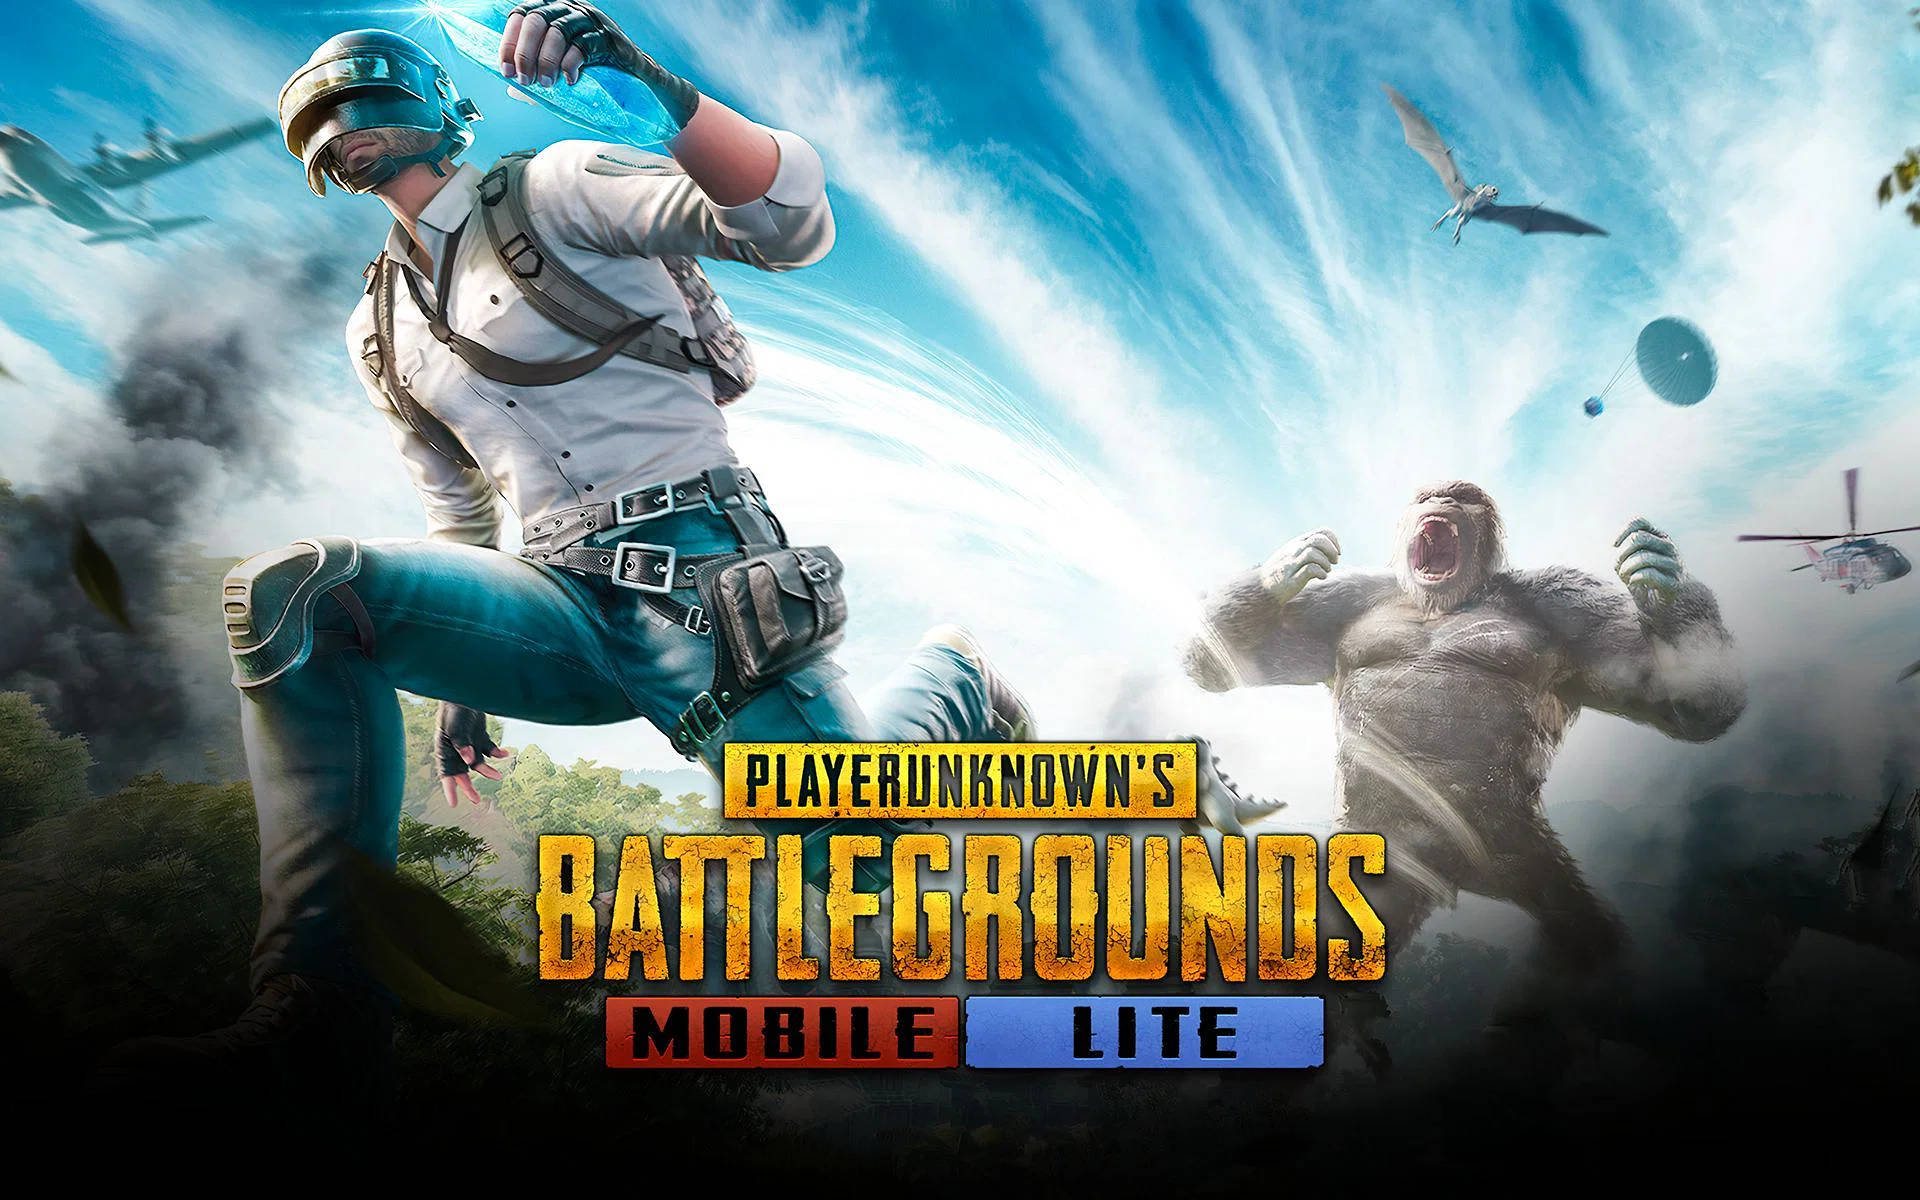 Pubg mobile Wallpapers Download | MobCup